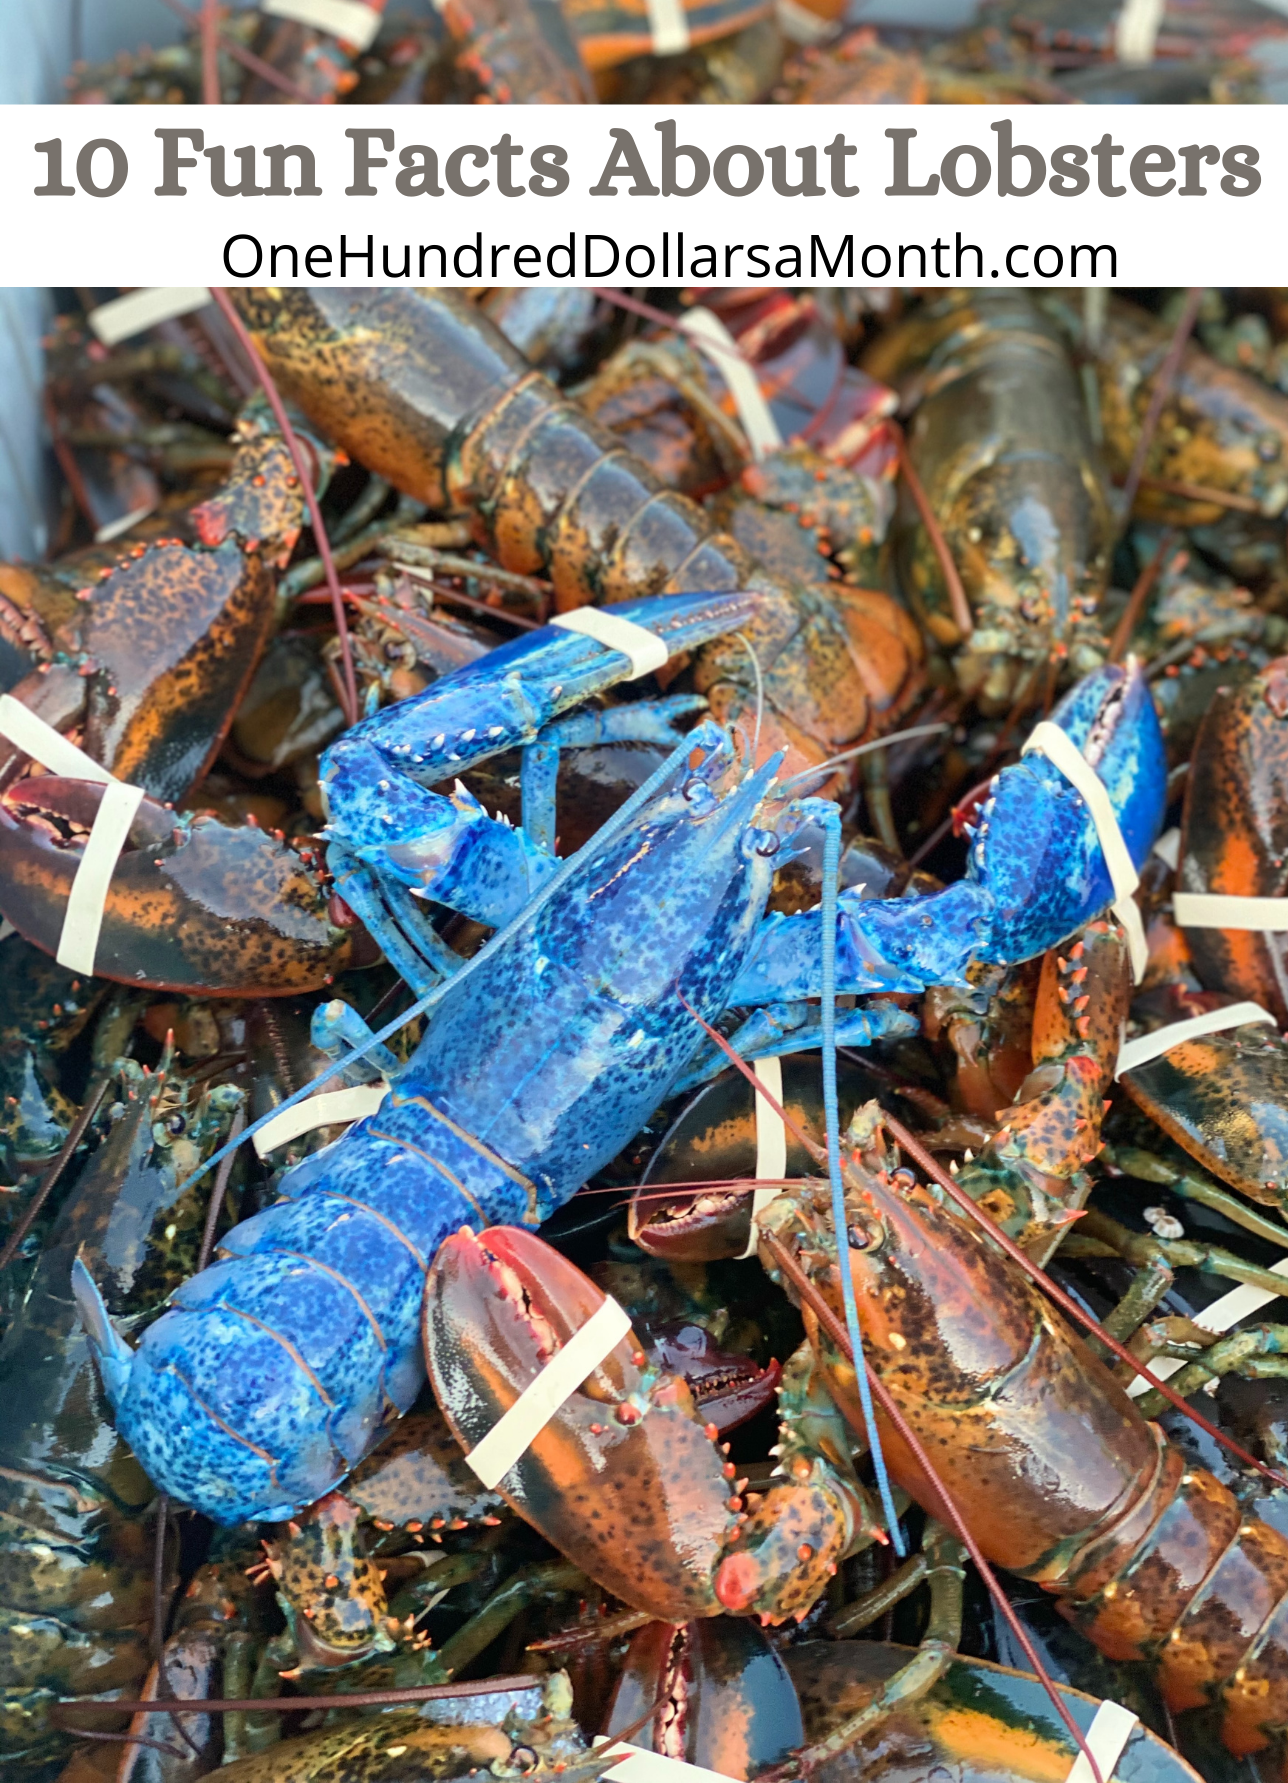 10 Fun Facts About Lobsters